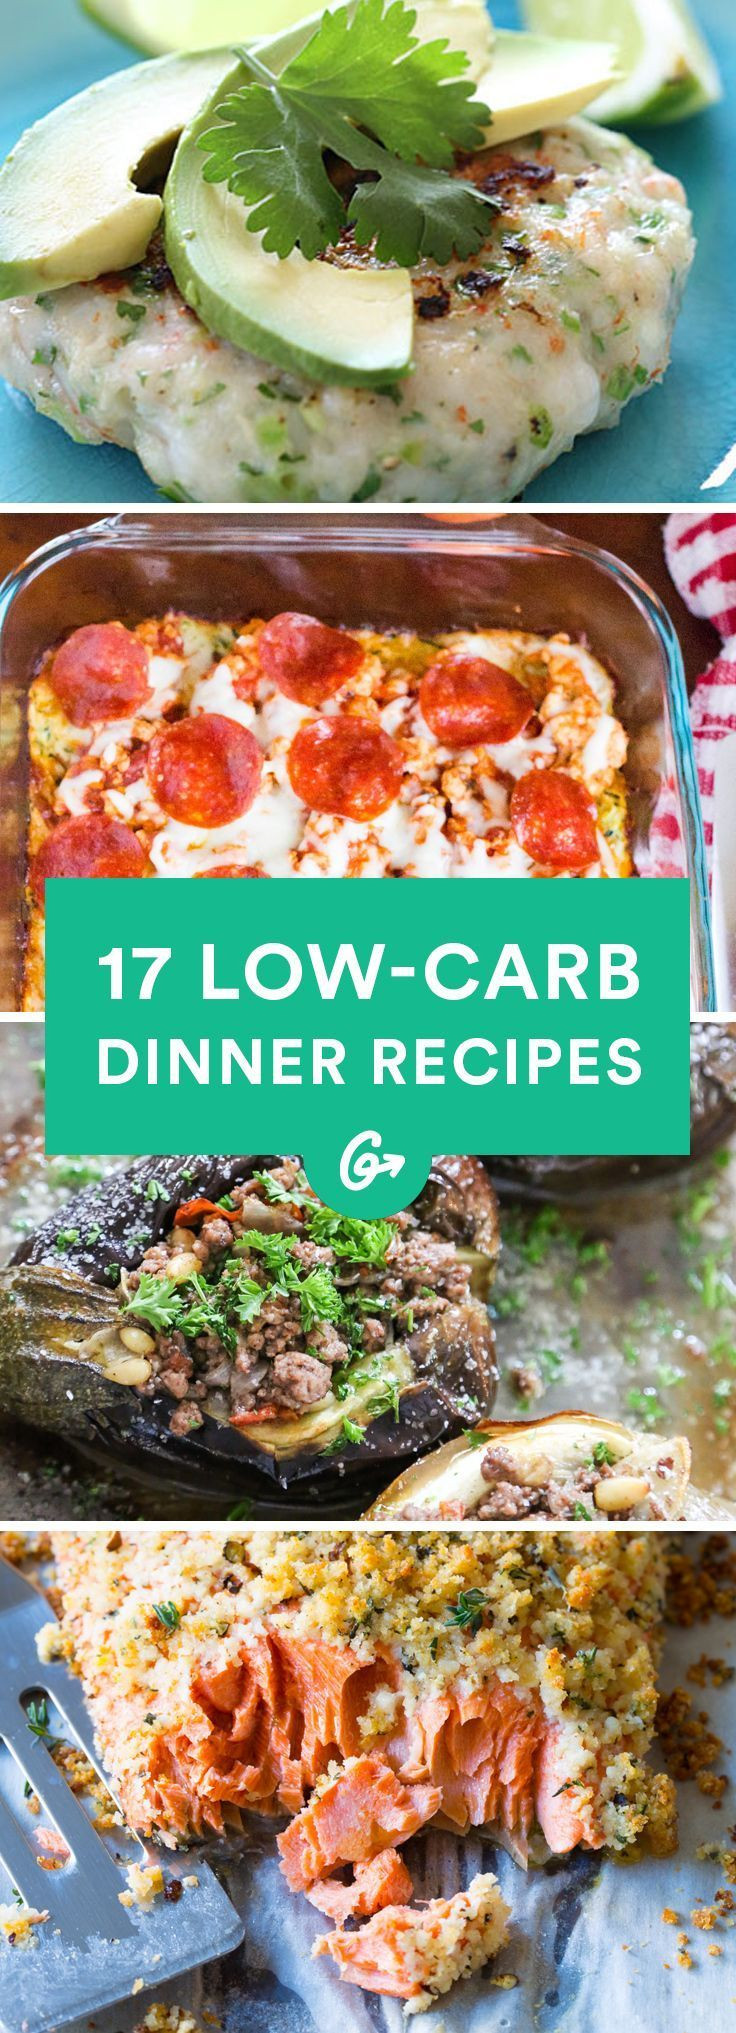 Low Carb Dinner Options
 17 Easy Low Carb Dinners